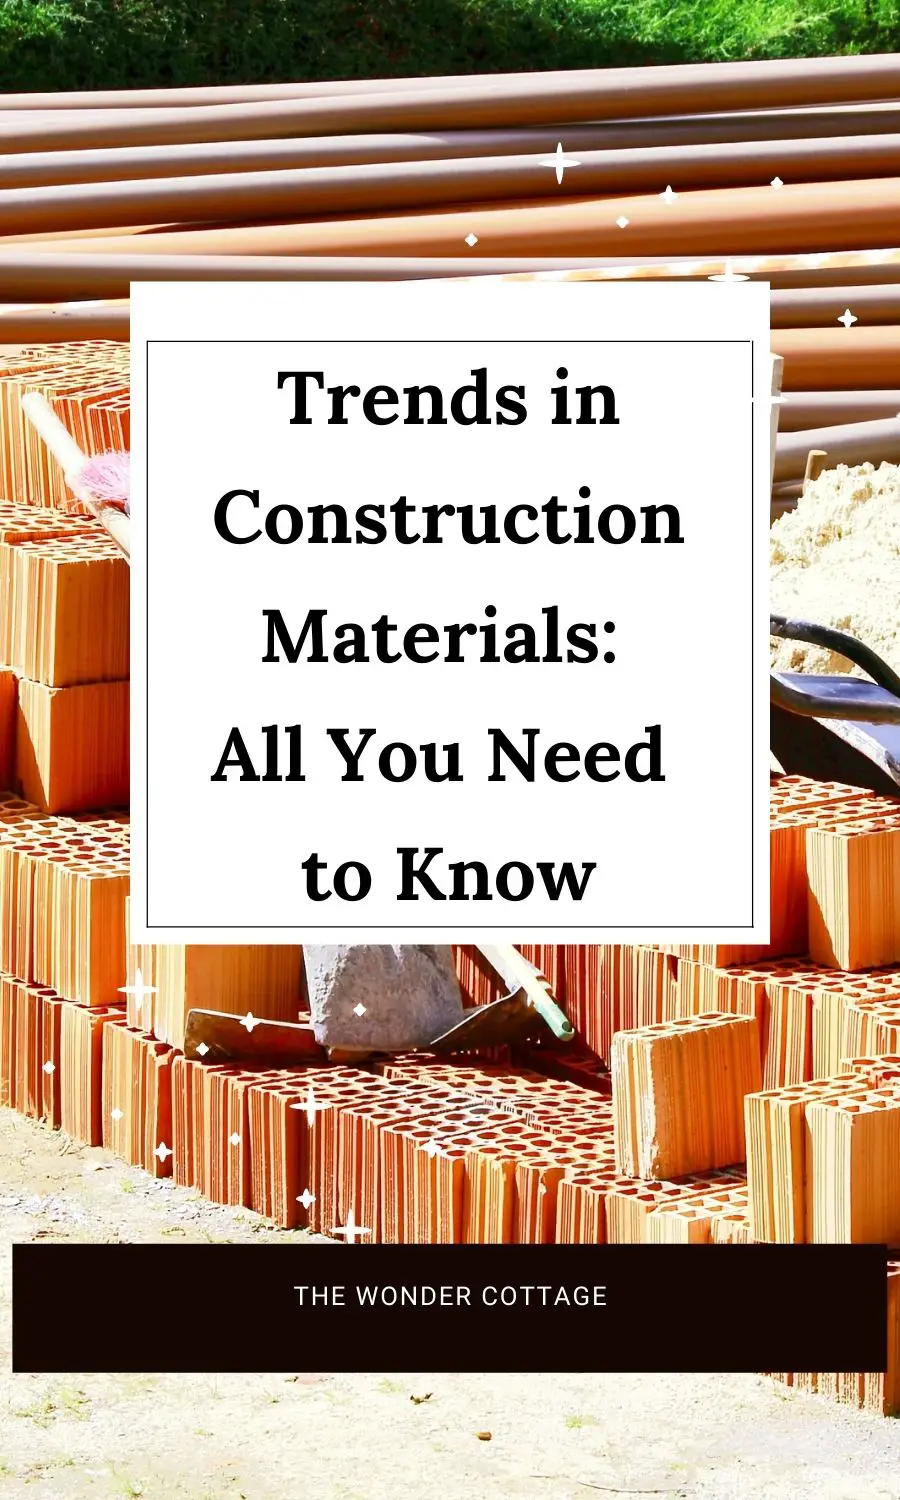 Trends in Construction Materials: All You Need to Know